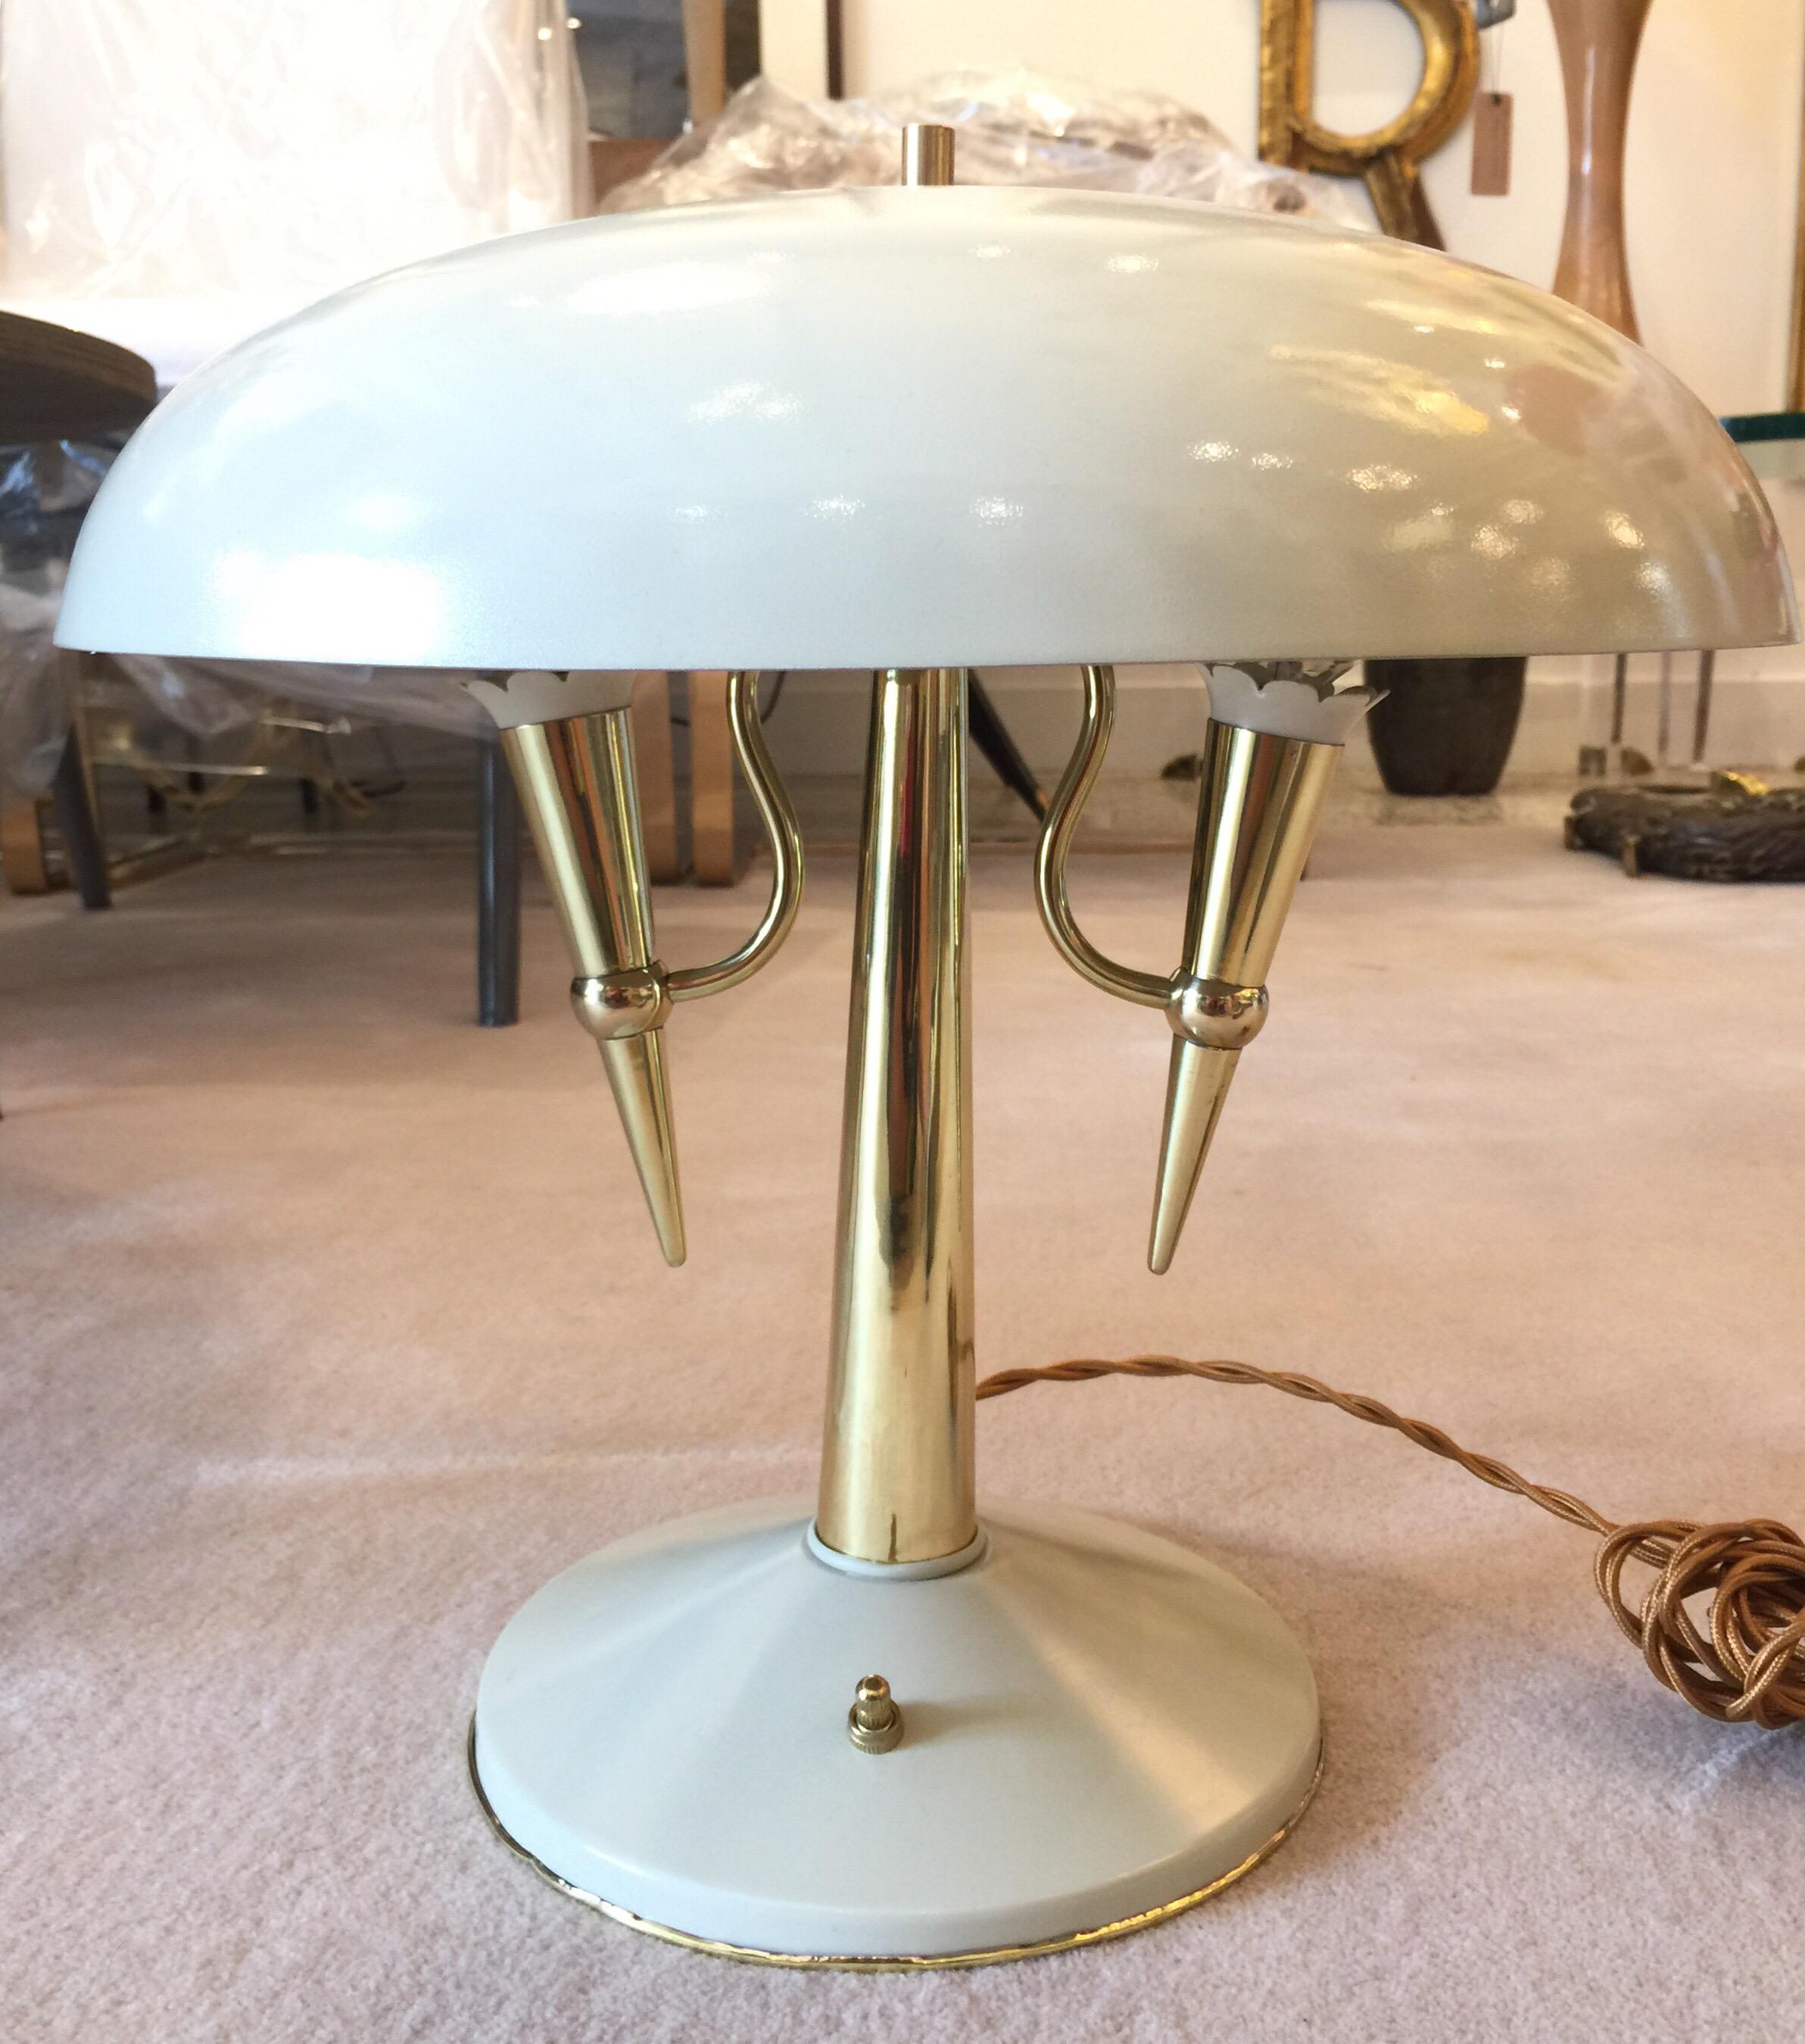 Two E-14 sockets, full professional refurbish with silk cable, this fantastic and well proportioned lamp--likely designed by Oscar Torlasco.  Elaborate metal and brass details around sockets. 